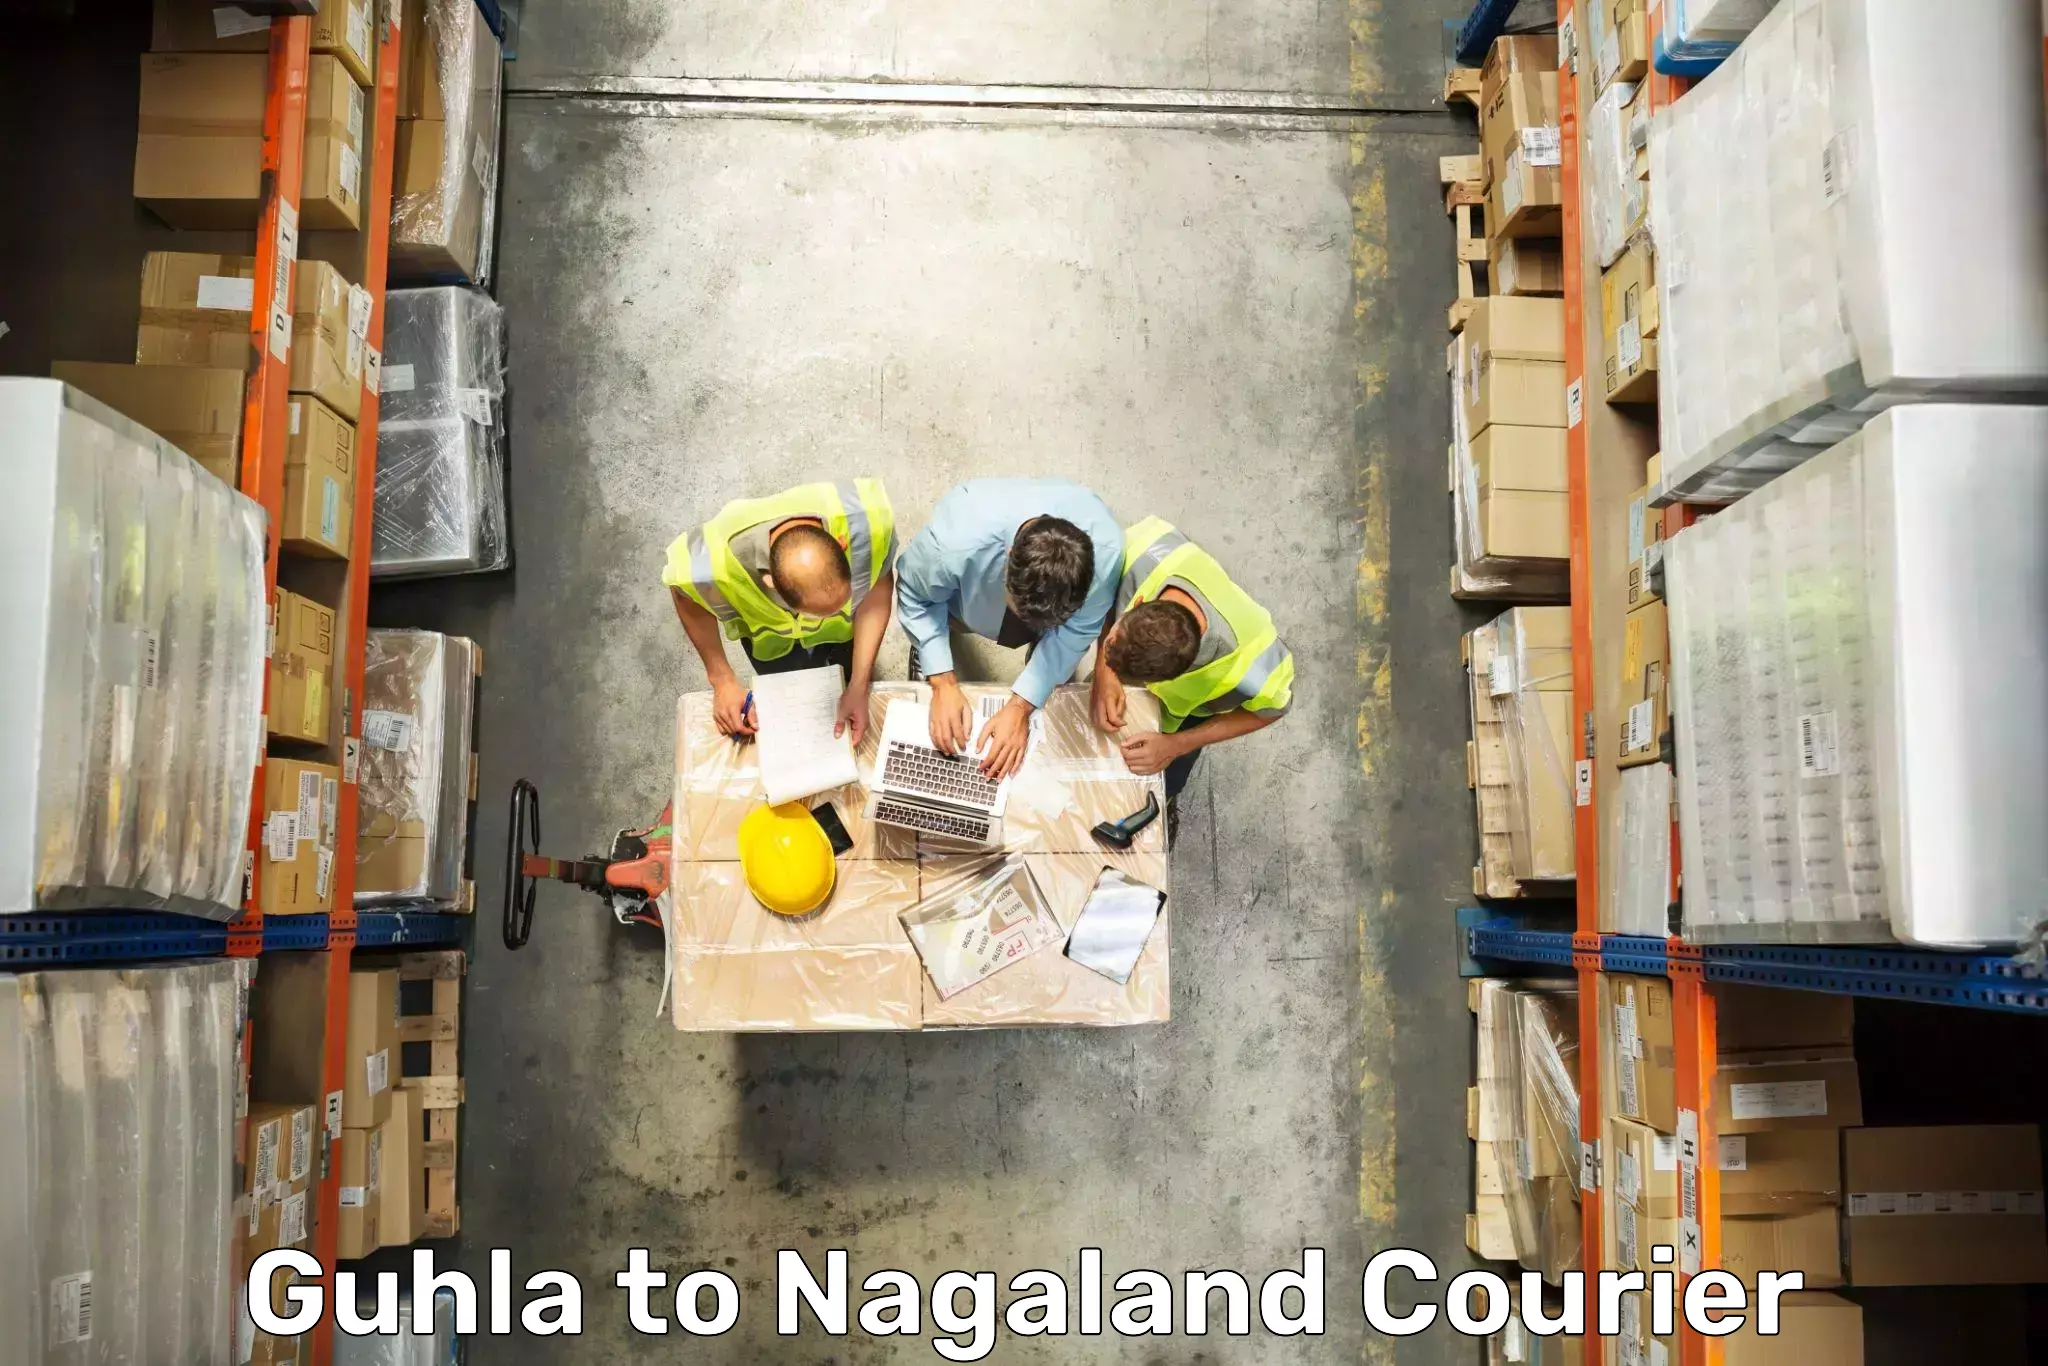 Luggage delivery app Guhla to Nagaland